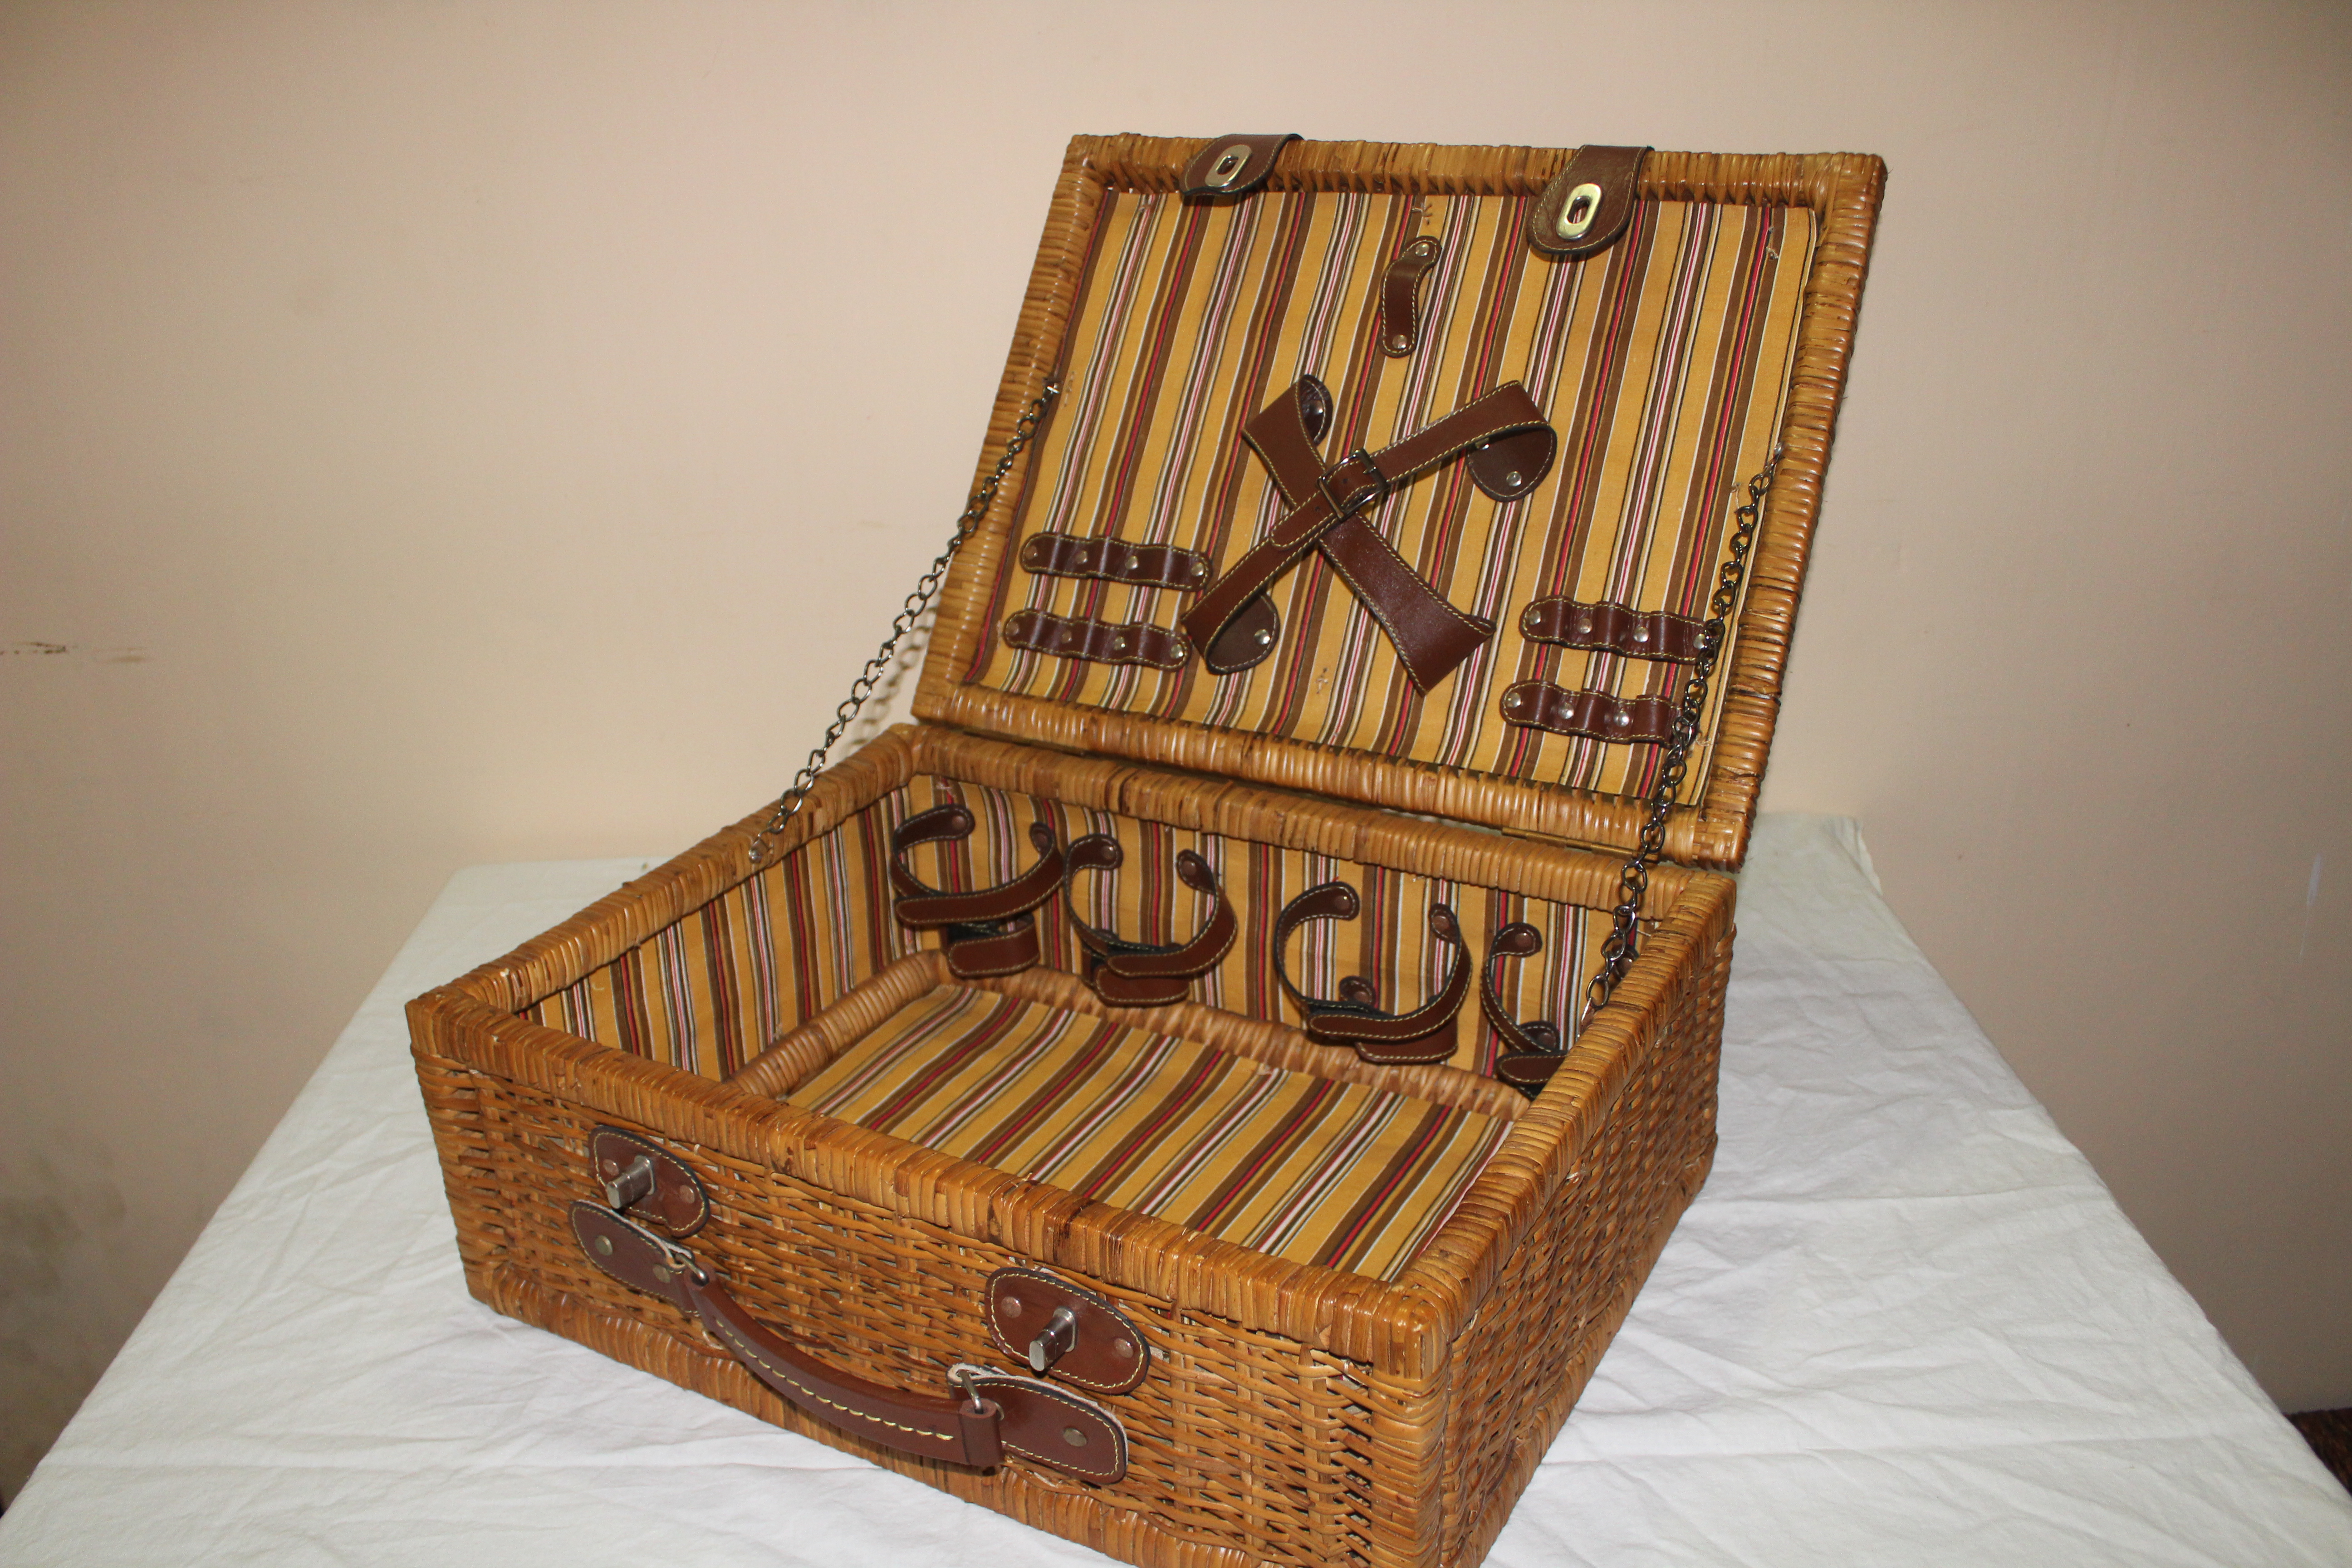 Decorated picnic basket made of cane, fitter with leather straps